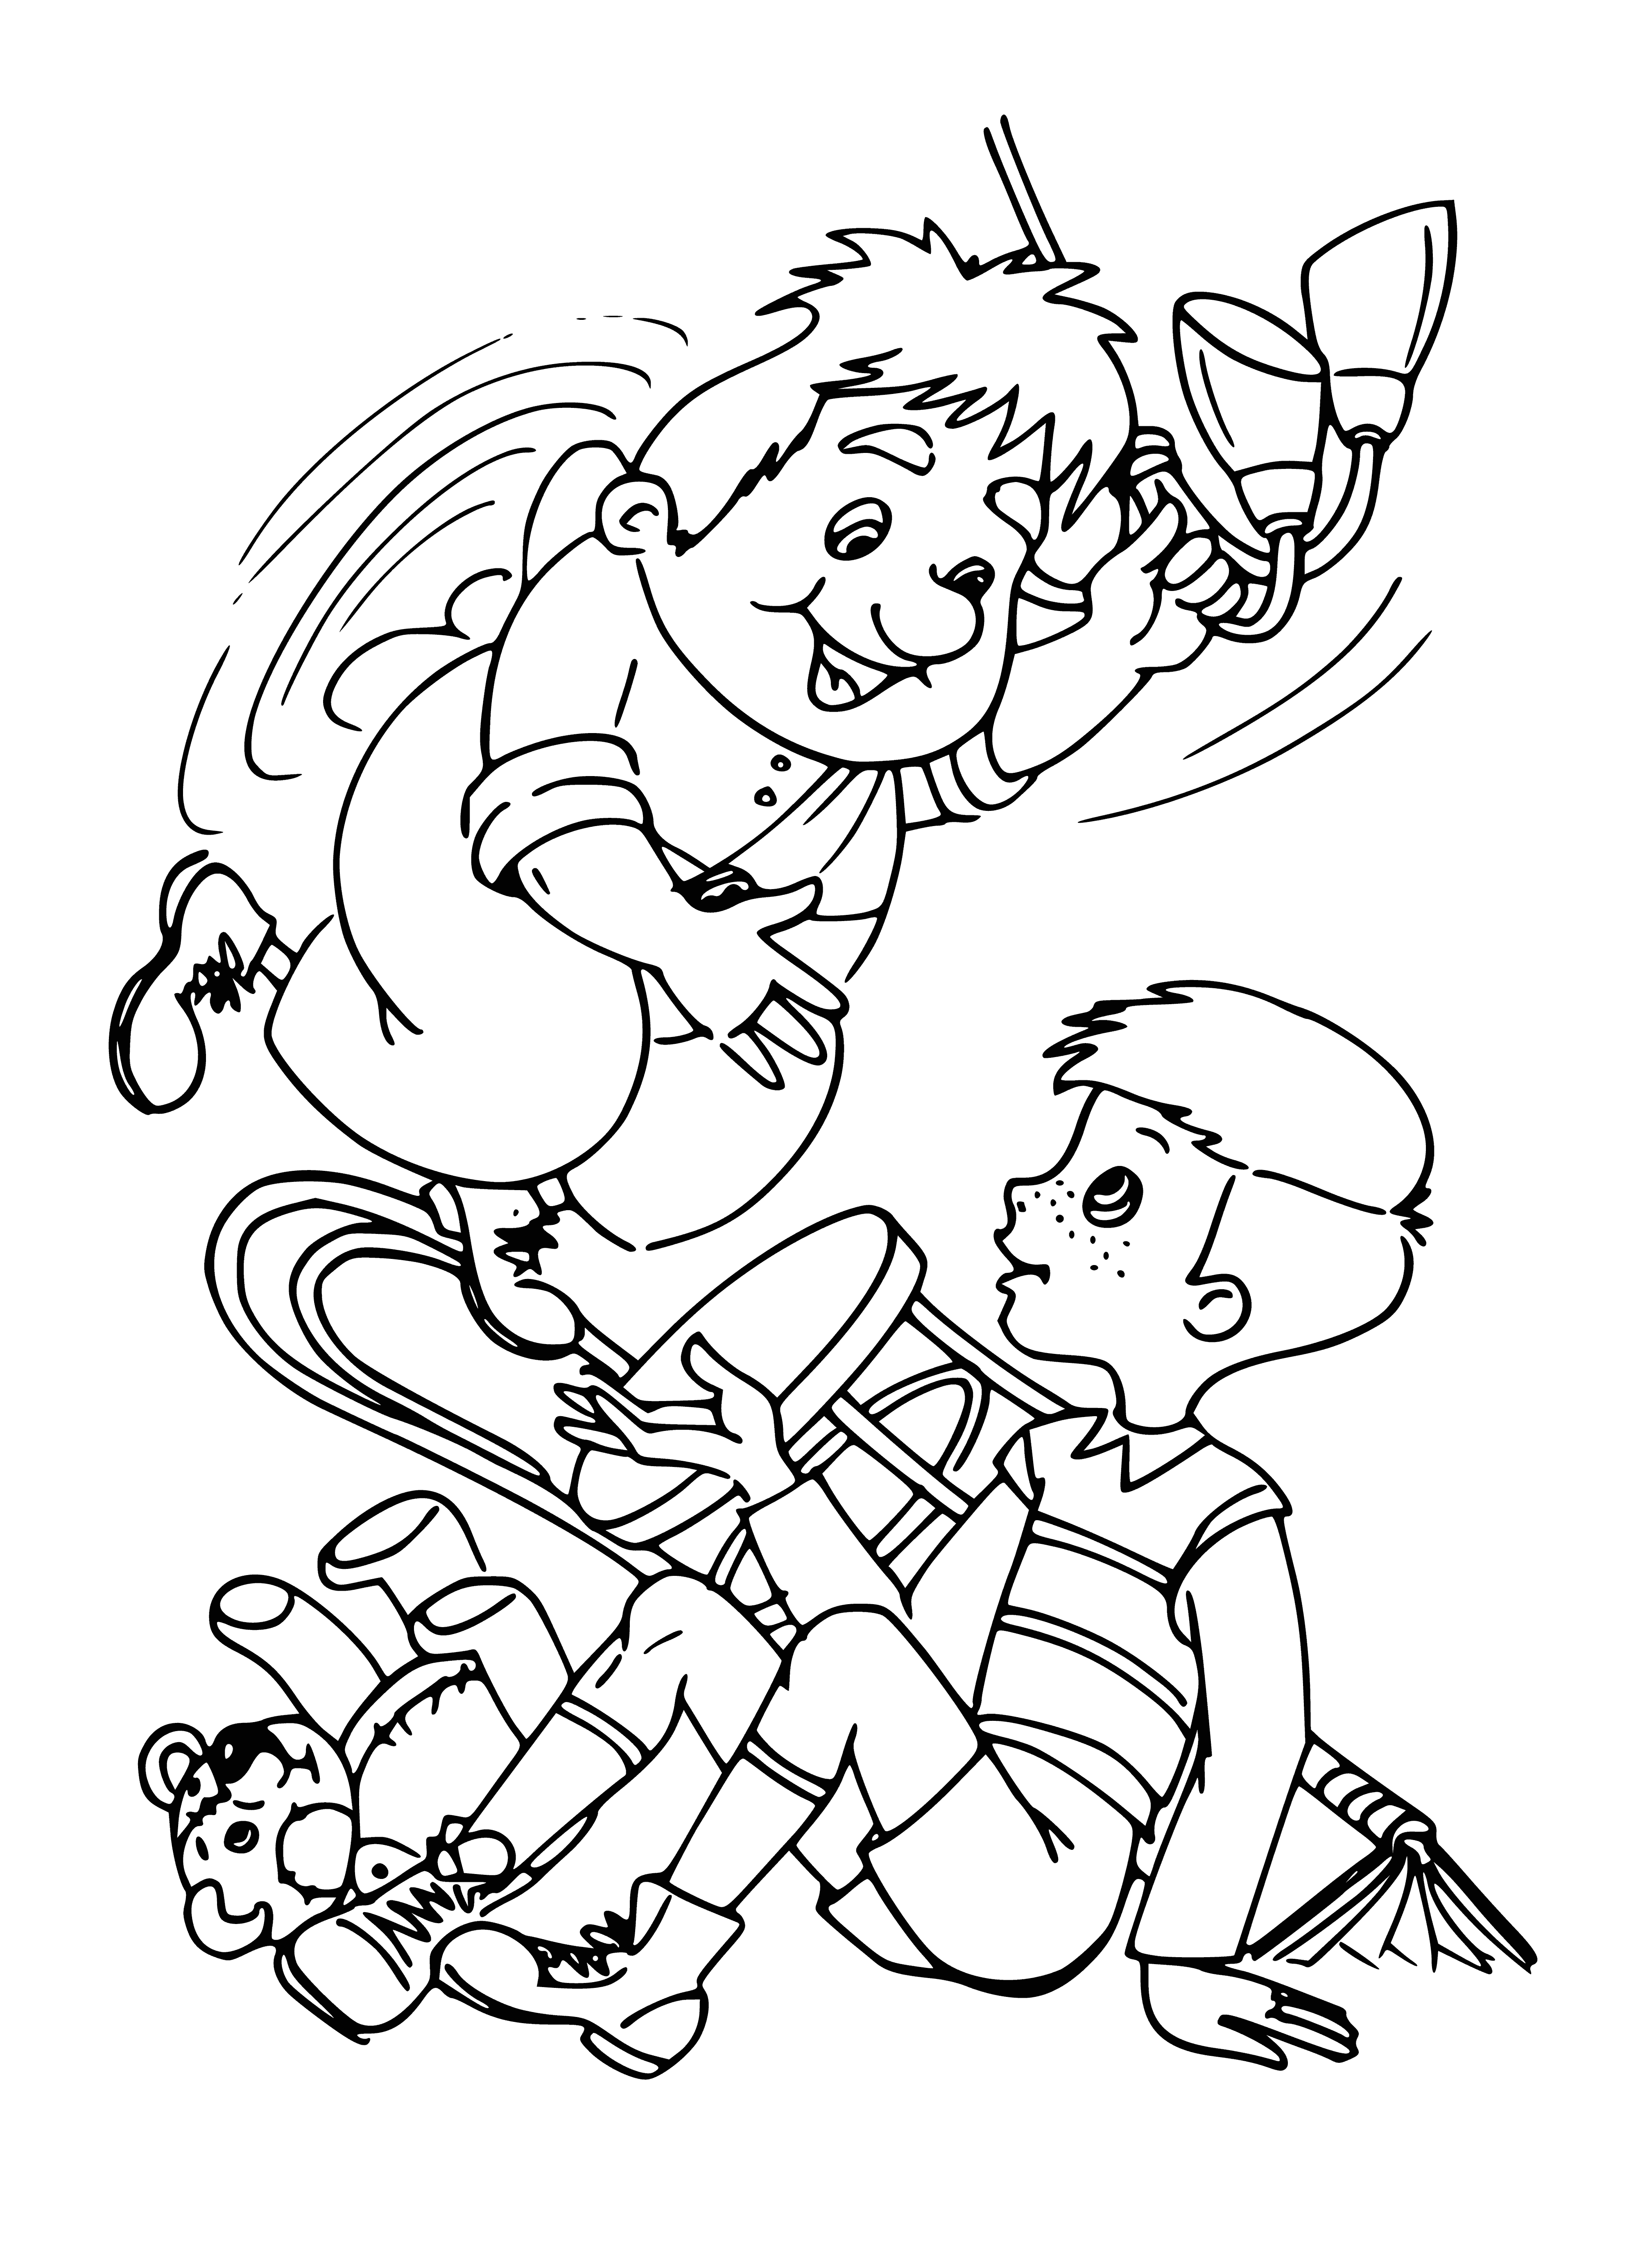 coloring page: Two grown men discuss an issue intently - Carlson & Kid, despite size difference, appear to be negotiating as equals.